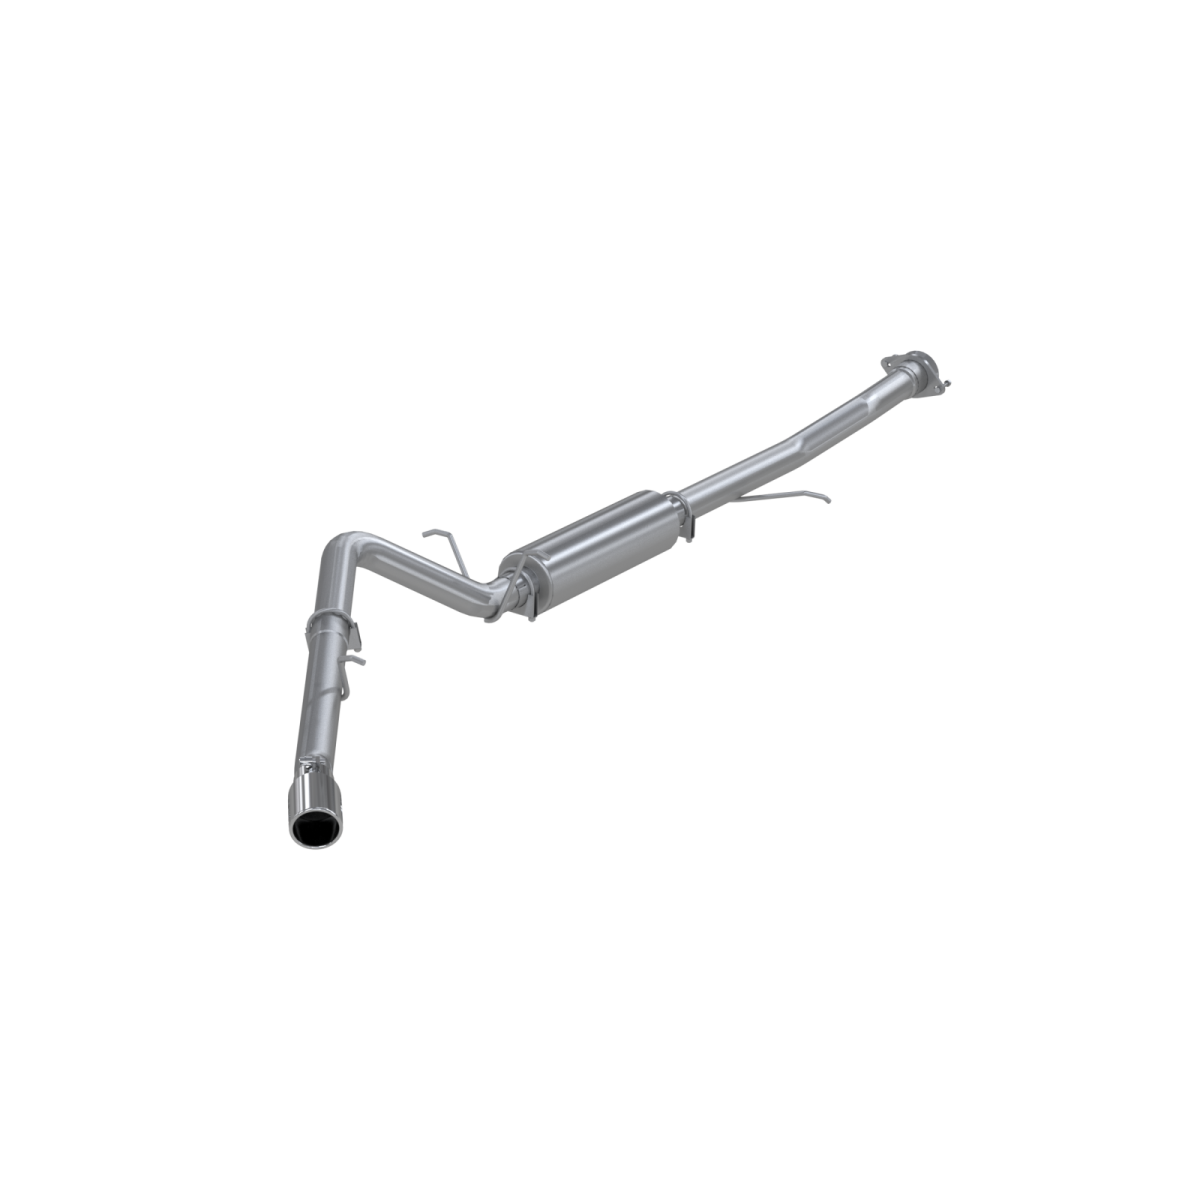 MBRP - MBRP 3 Inch Cat Back Exhaust System Single Side Aluminized Steel For 07-10 Escalade EXT, ESV/Yukon Denali XL S5034AL